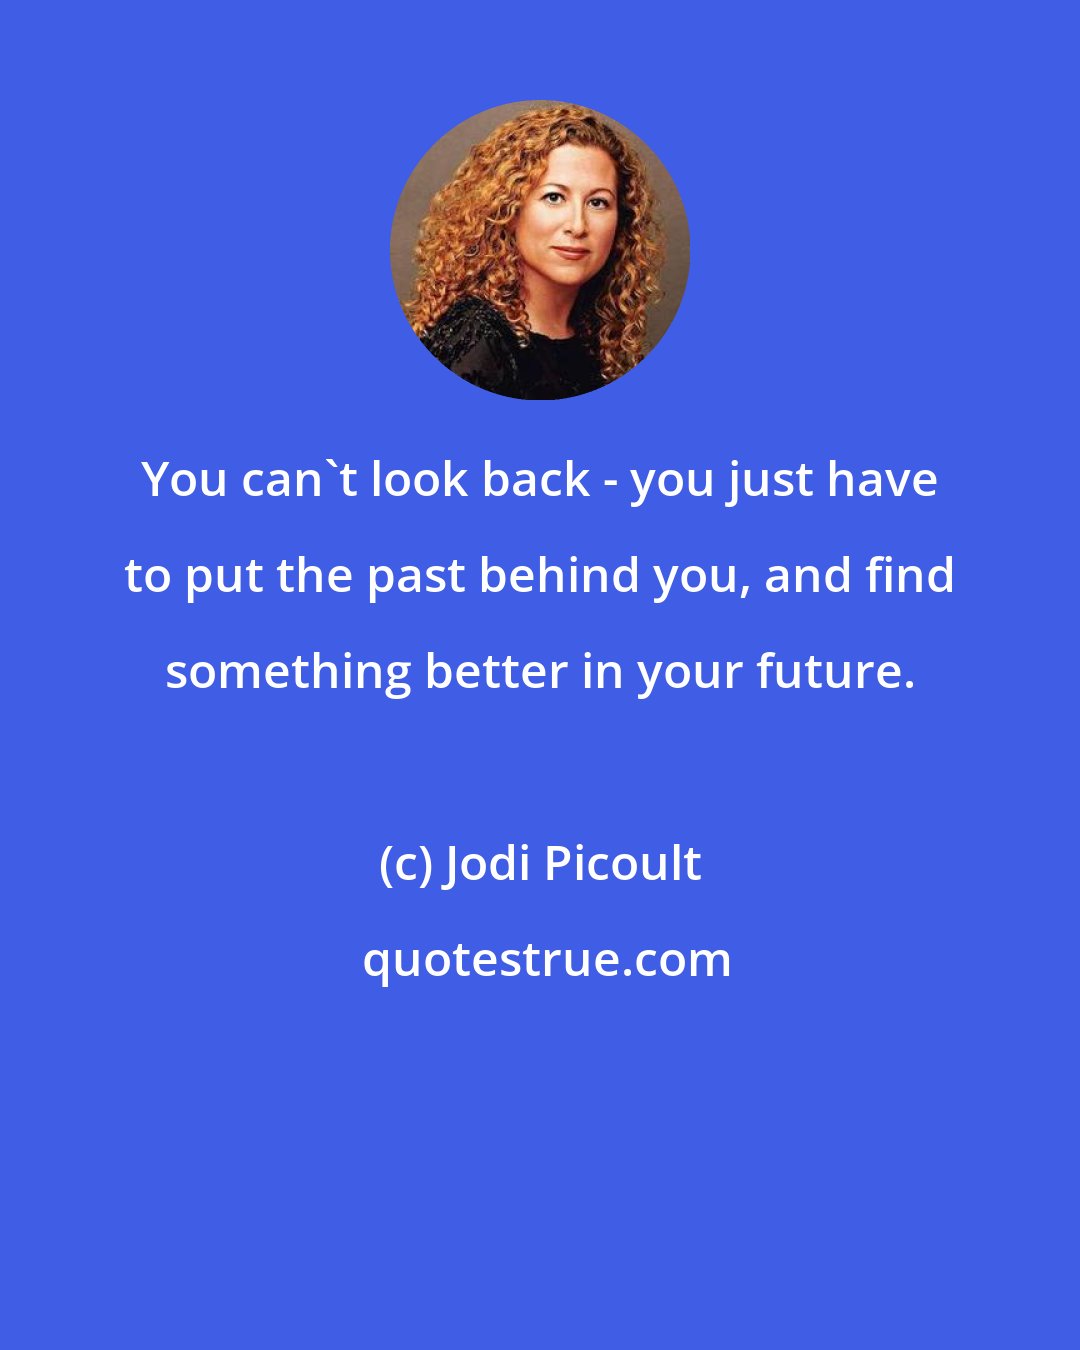 Jodi Picoult: You can't look back - you just have to put the past behind you, and find something better in your future.